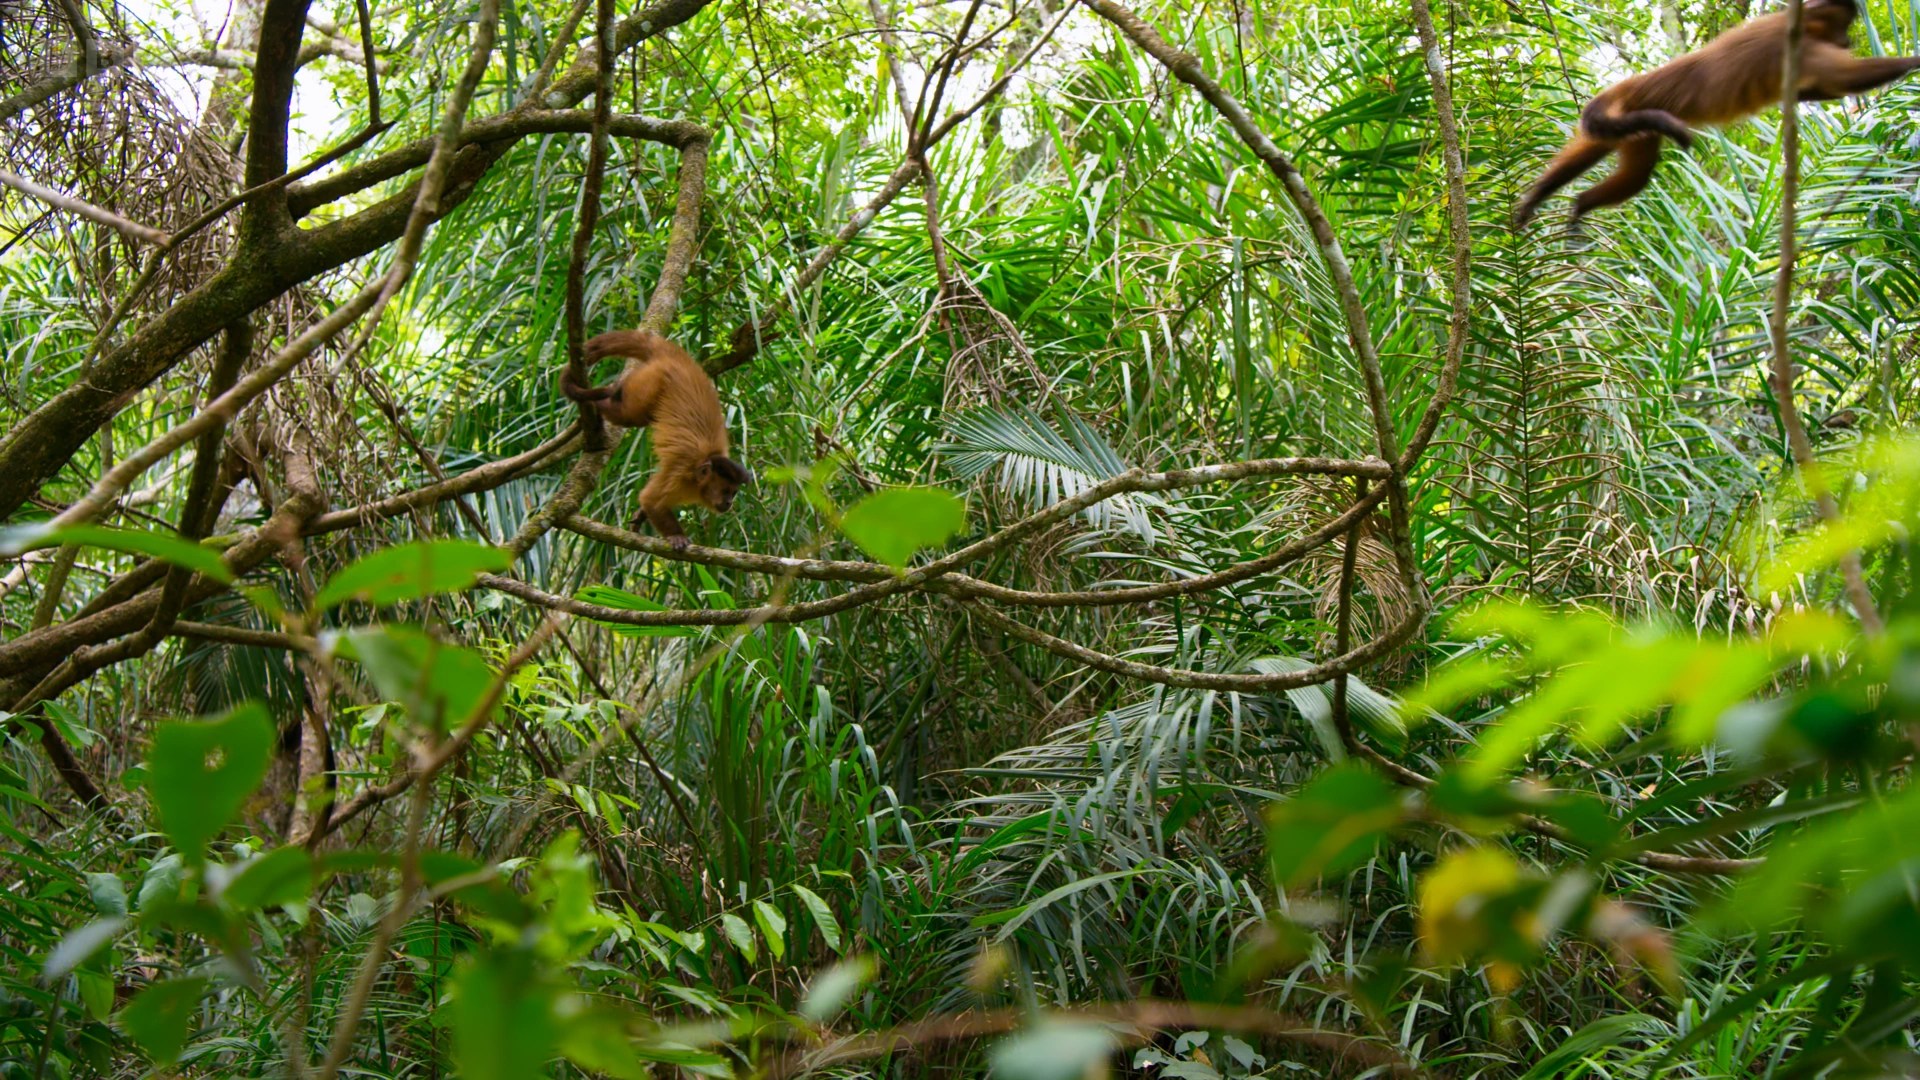 Azaras's capuchin (Sapajus cay) as shown in Seven Worlds, One Planet - South America